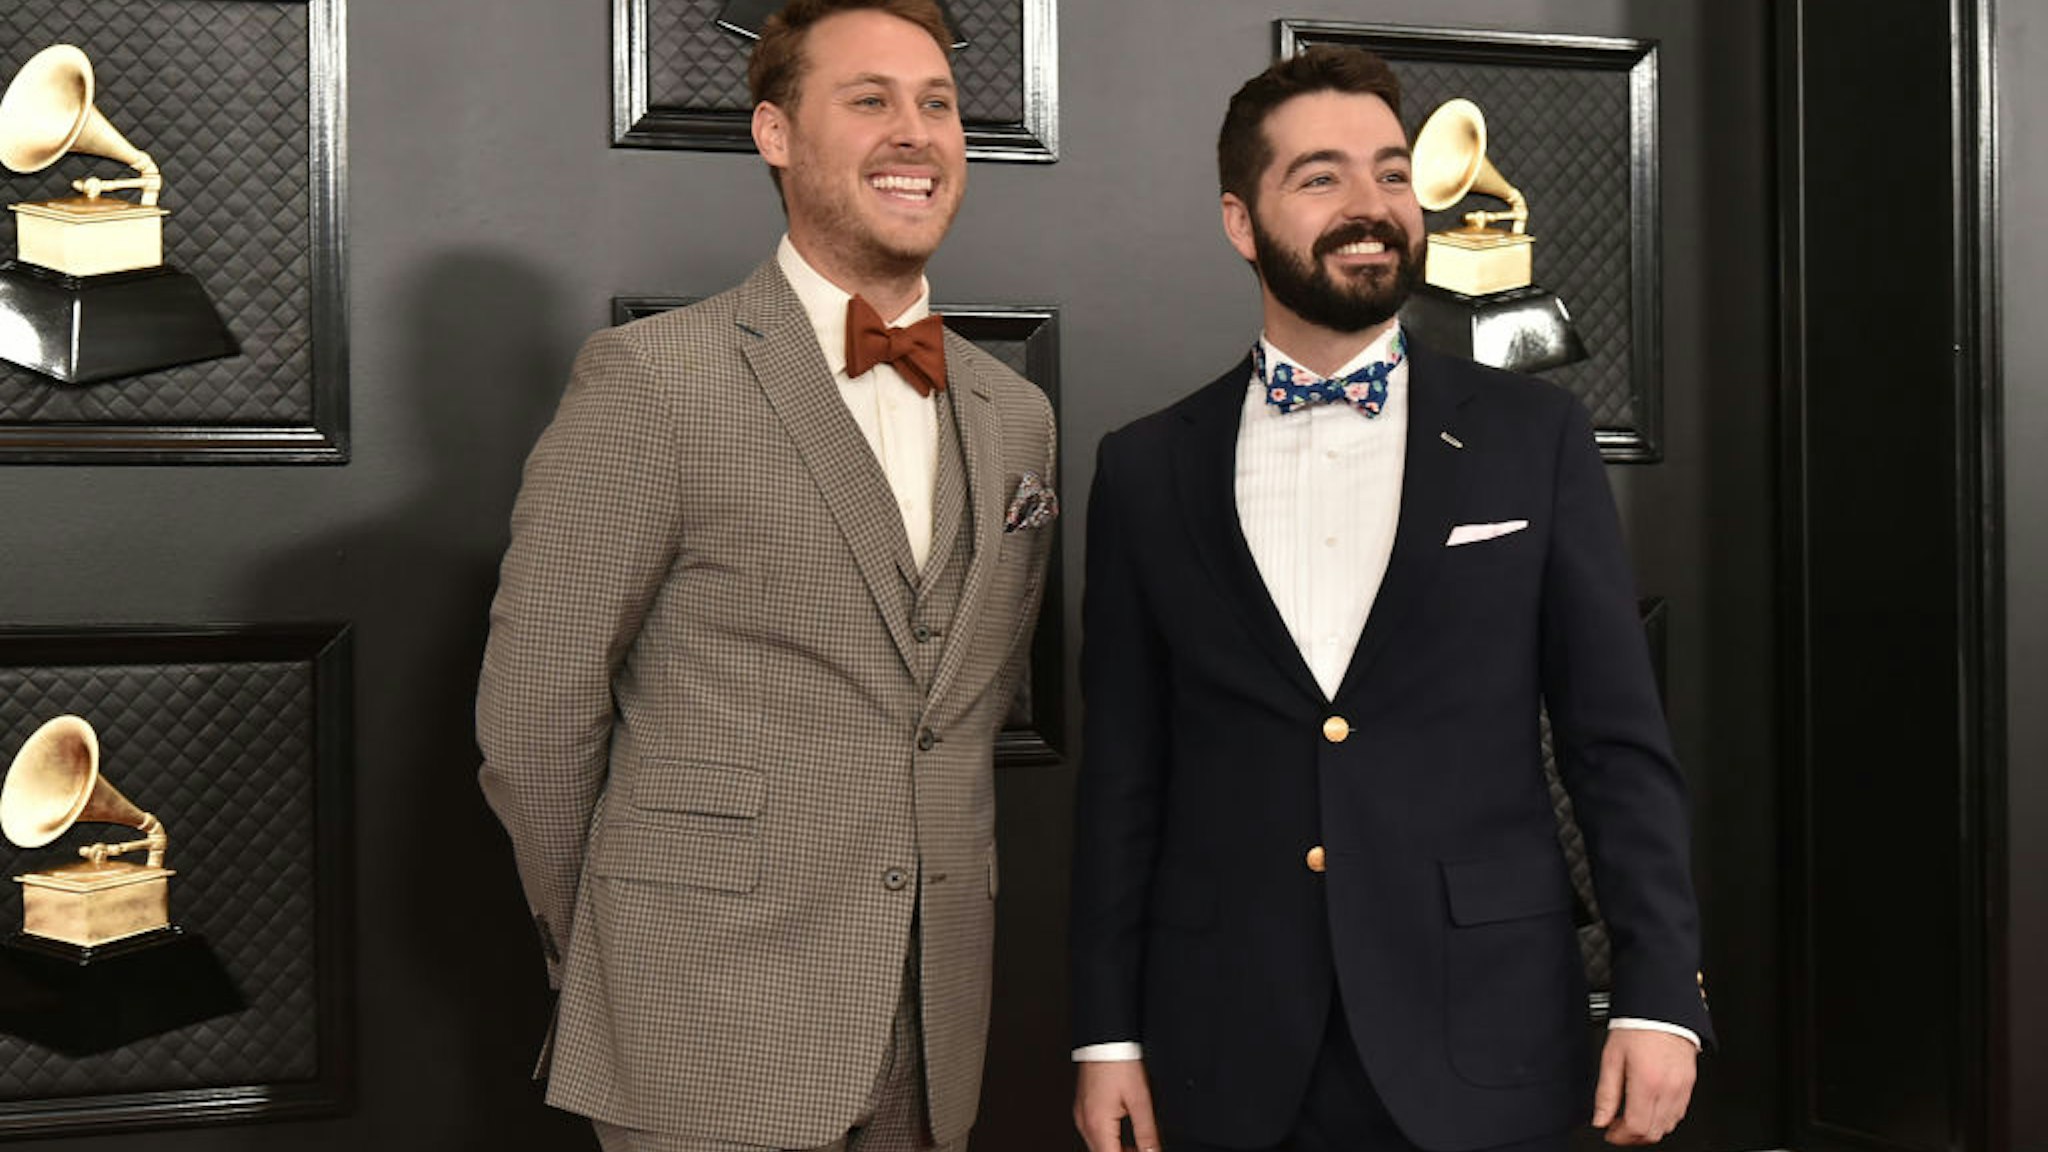 Joe Mailander and Justin Lansing of The Okee Dokee Brothers attend the 62nd Annual Grammy Awards at Staples Center on January 26, 2020 in Los Angeles, CA.